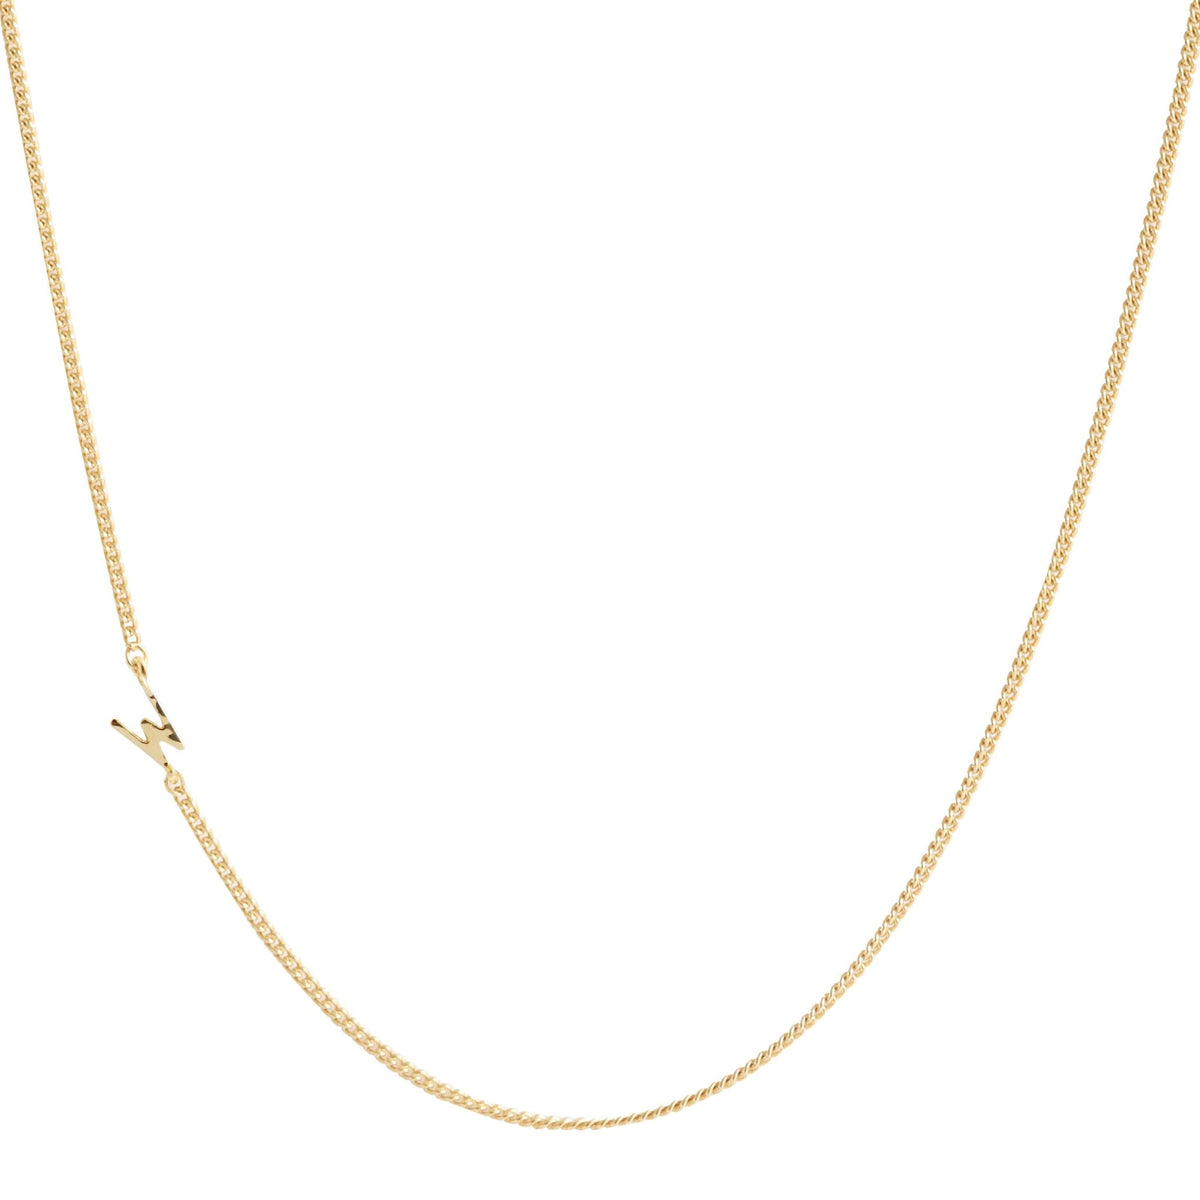 NOTABLE OFFSET INITIAL NECKLACE - W - GOLD - SO PRETTY CARA COTTER